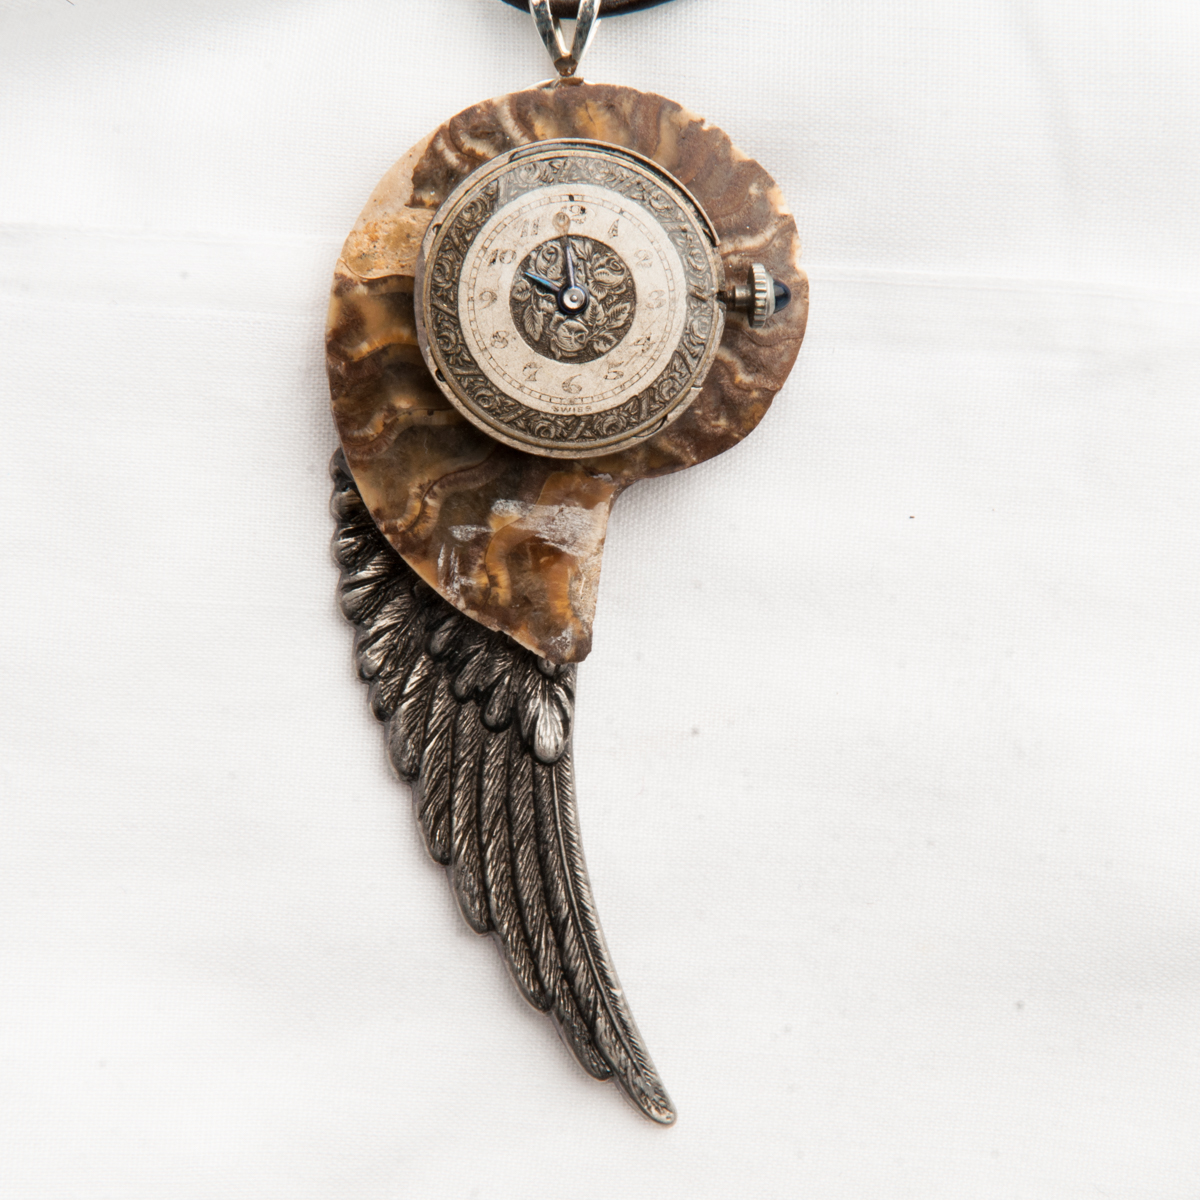 antiquarian couture bringing up bust form antique watch fossil necklace